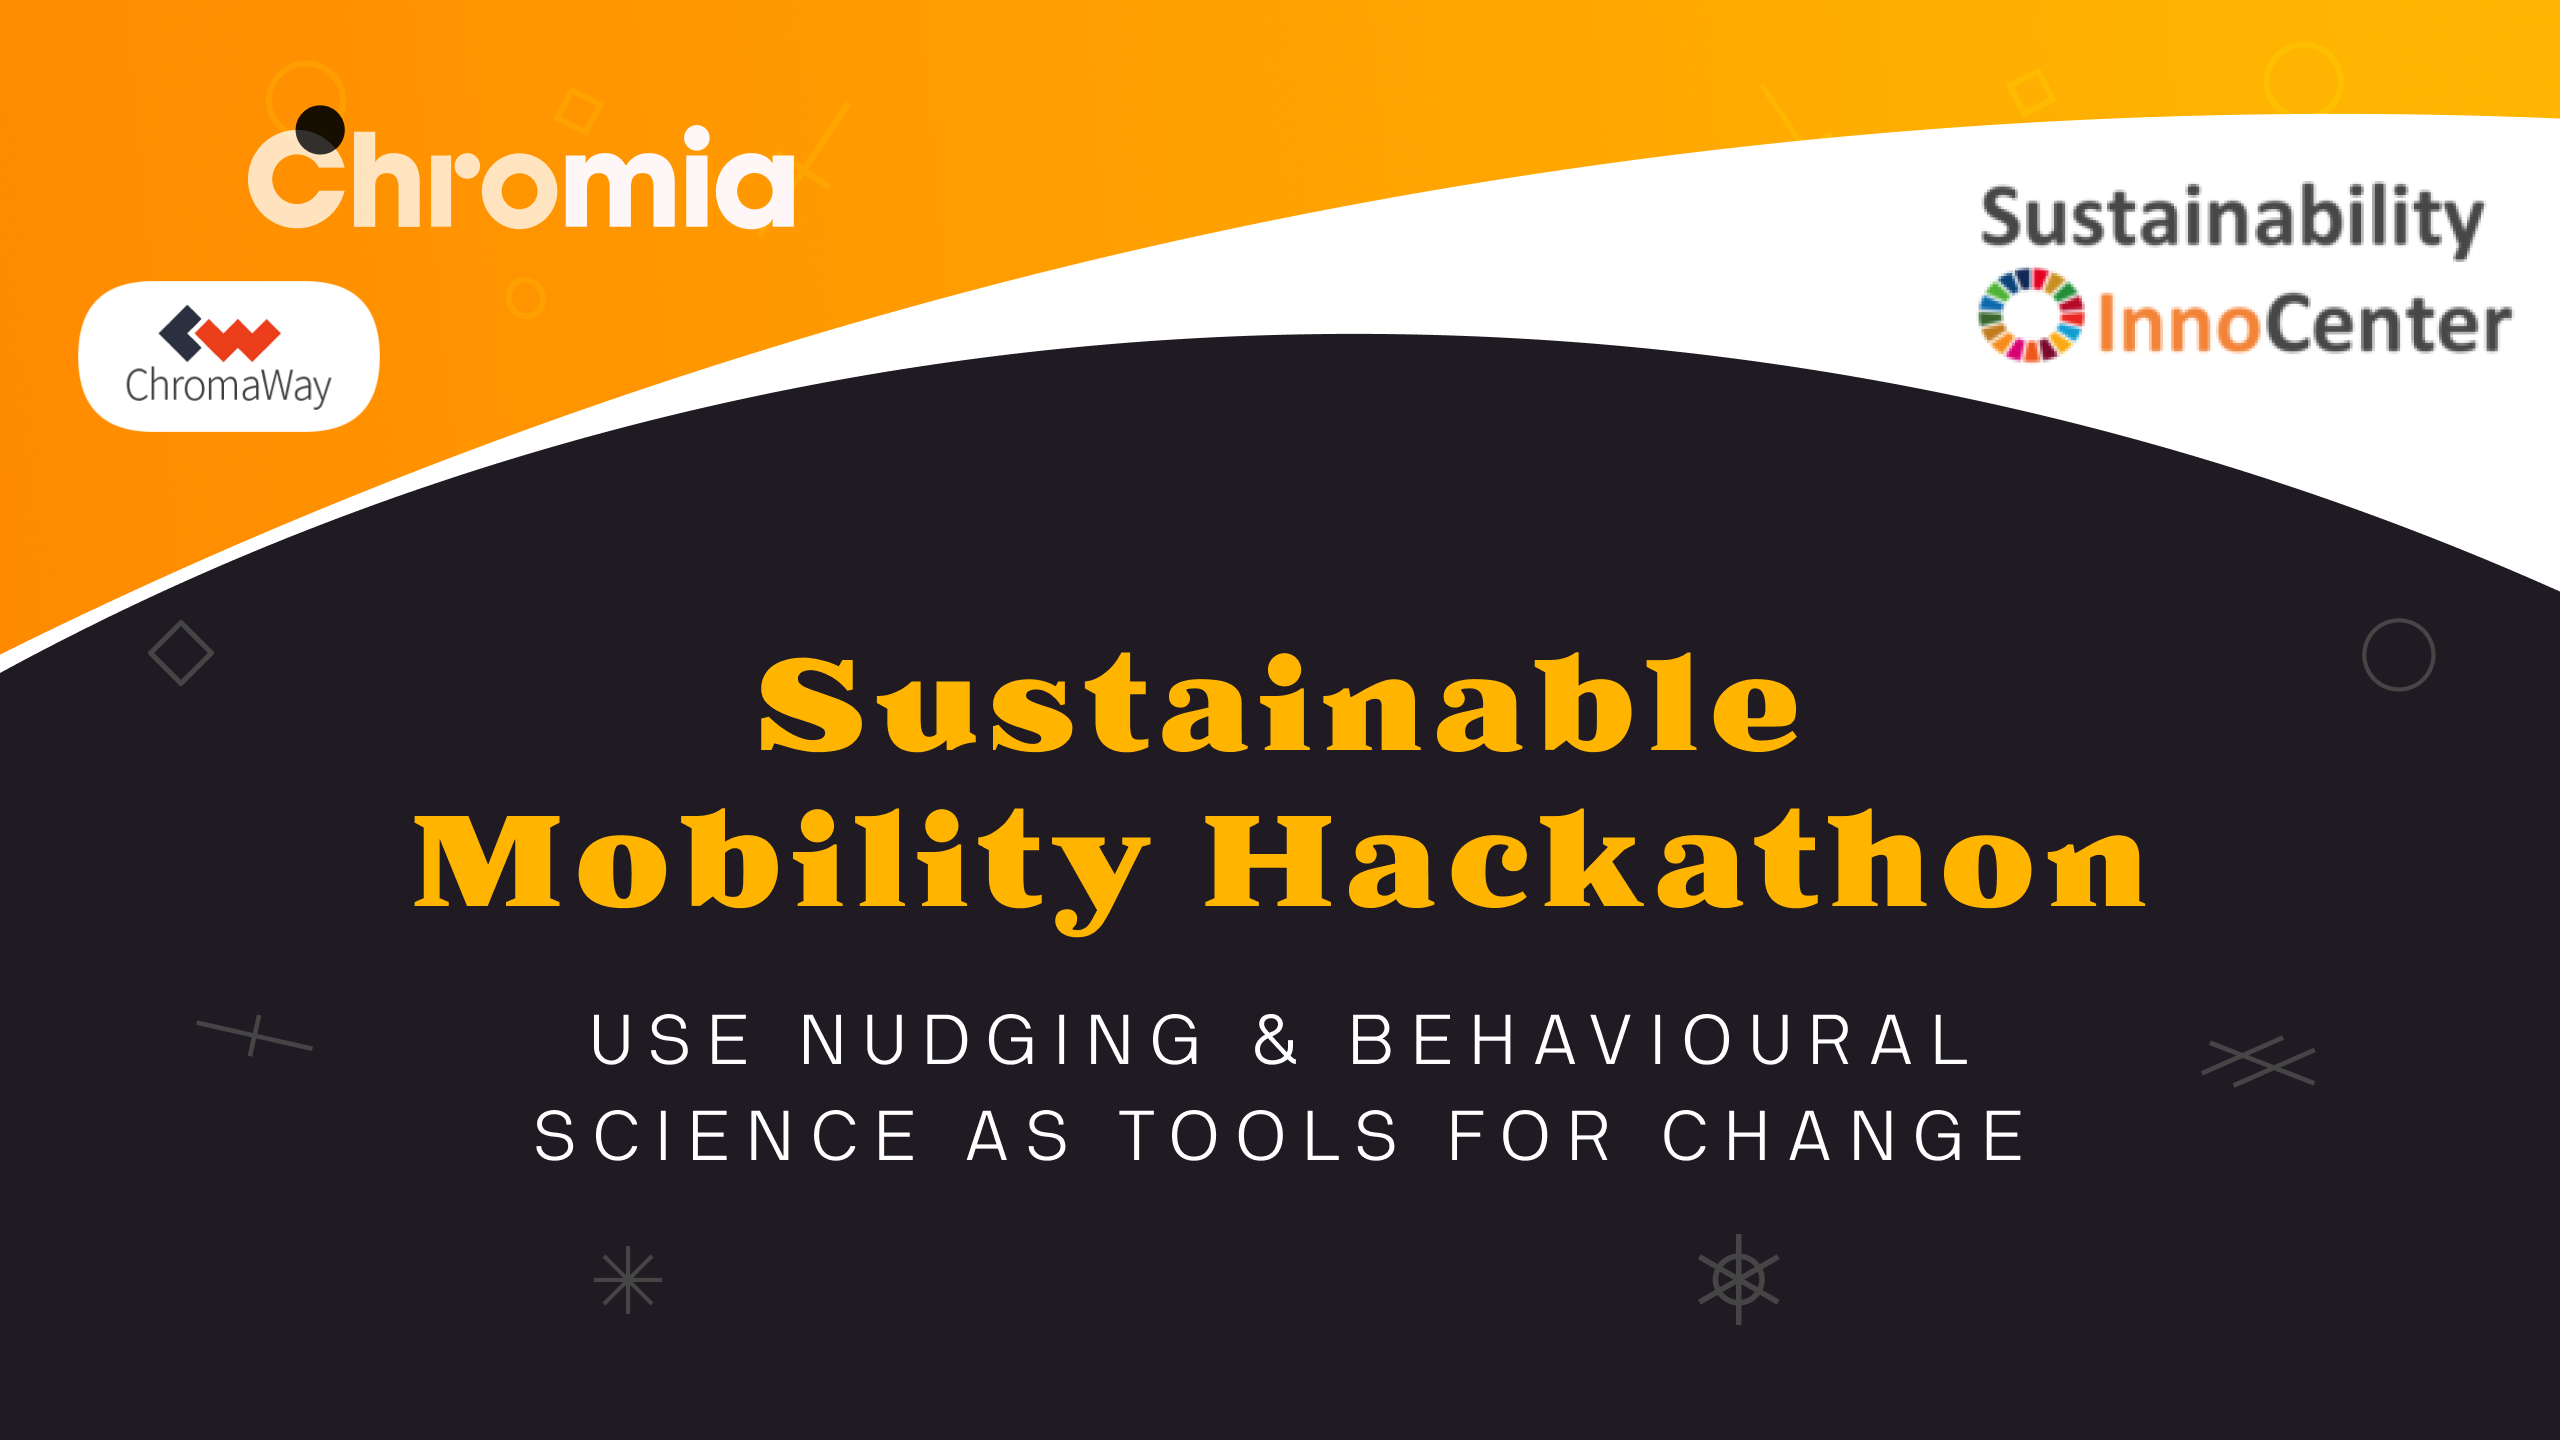 ChromaWay being Partner at Sustainable Mobility Hackathon